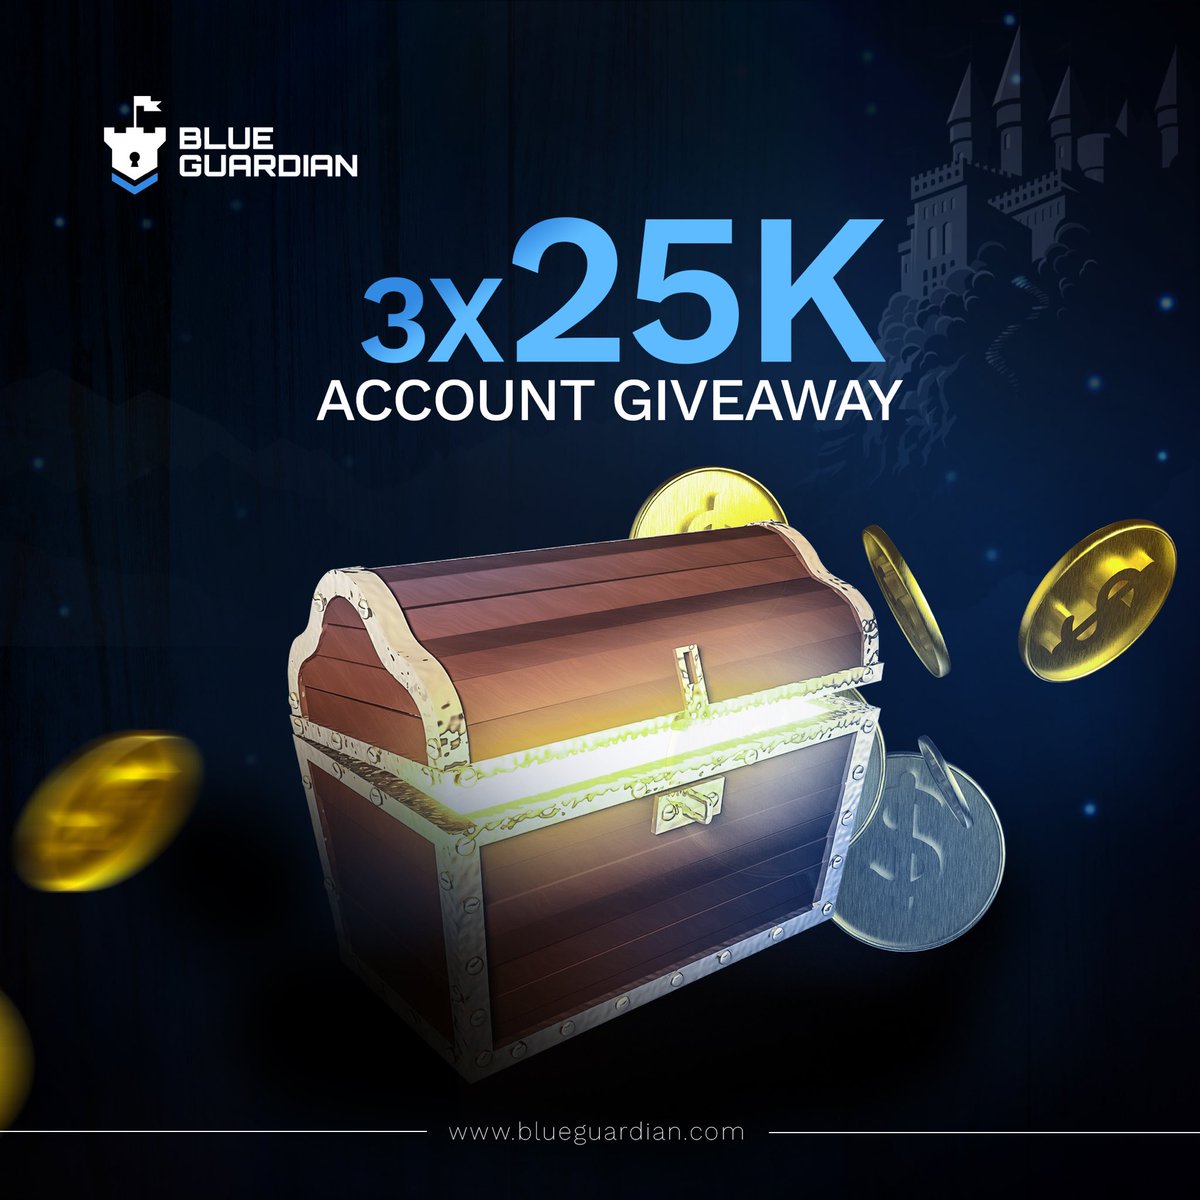 🥂🌸 GIVEAWAY TIME 🥂🌸 I'll be giving out 3 X $25k Challenge Accounts courtesy @BlueGuardiancom FOLLOW ALL INSTRUCTIONS BELOW‼️ 1. Follow @BlueGuardiancom | @goldukaegb 2. Like Comment and Retweet @BlueGuardiancom pinned tweet 3. Like and repost 🌸🥂 4. Tag 3 trading